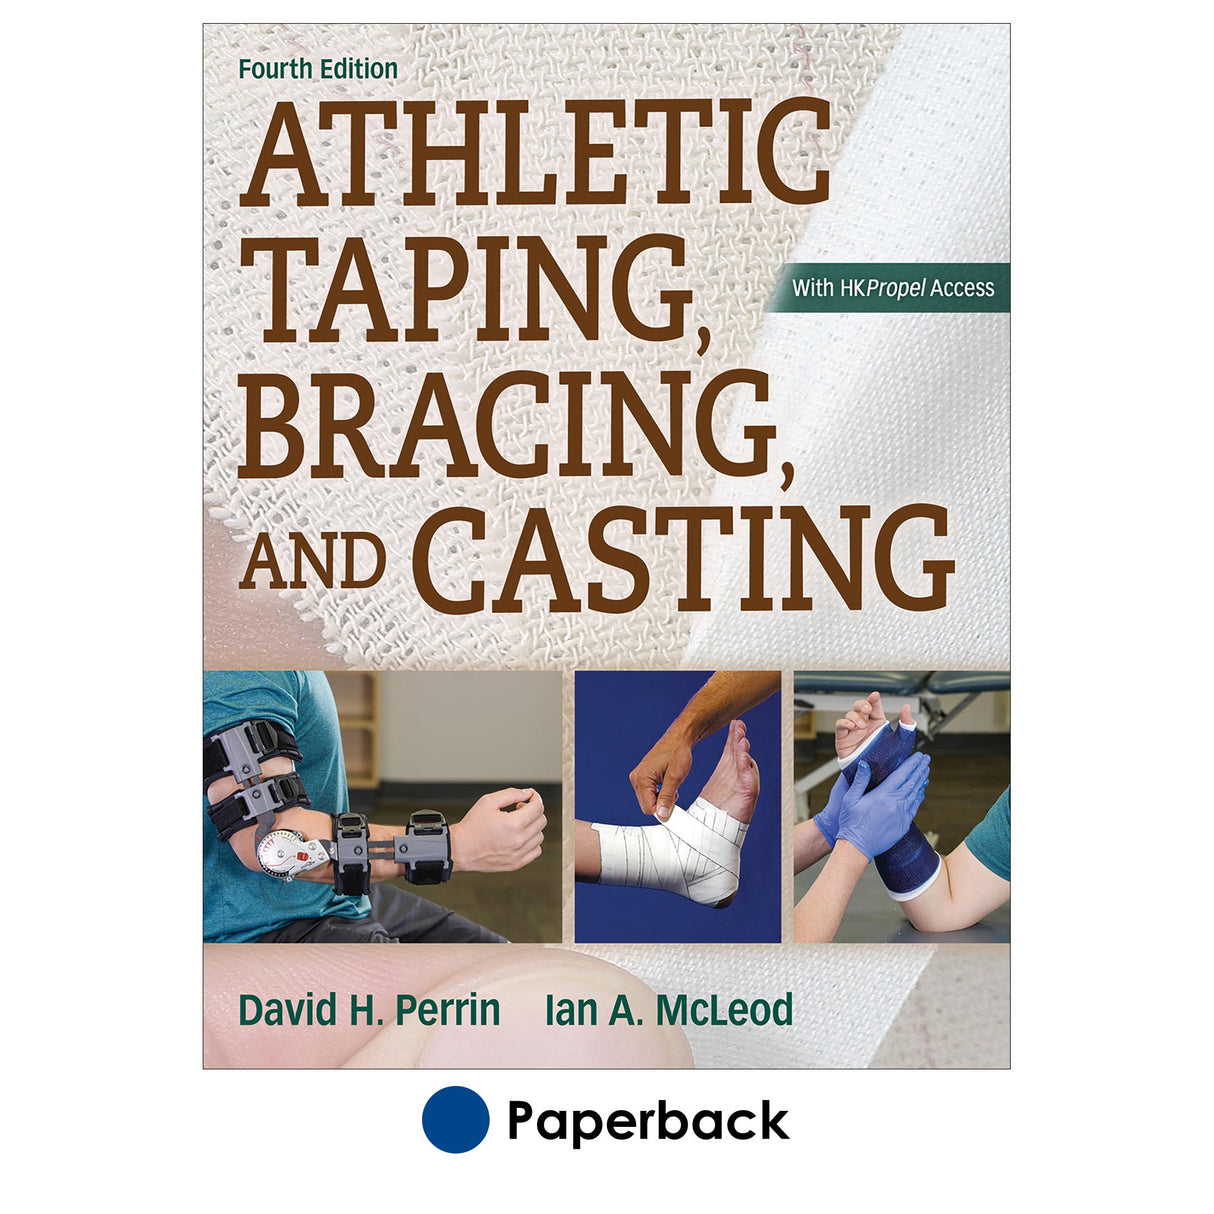 Athletic Taping, Bracing, and Casting, 4th Edition With HKPropel Access